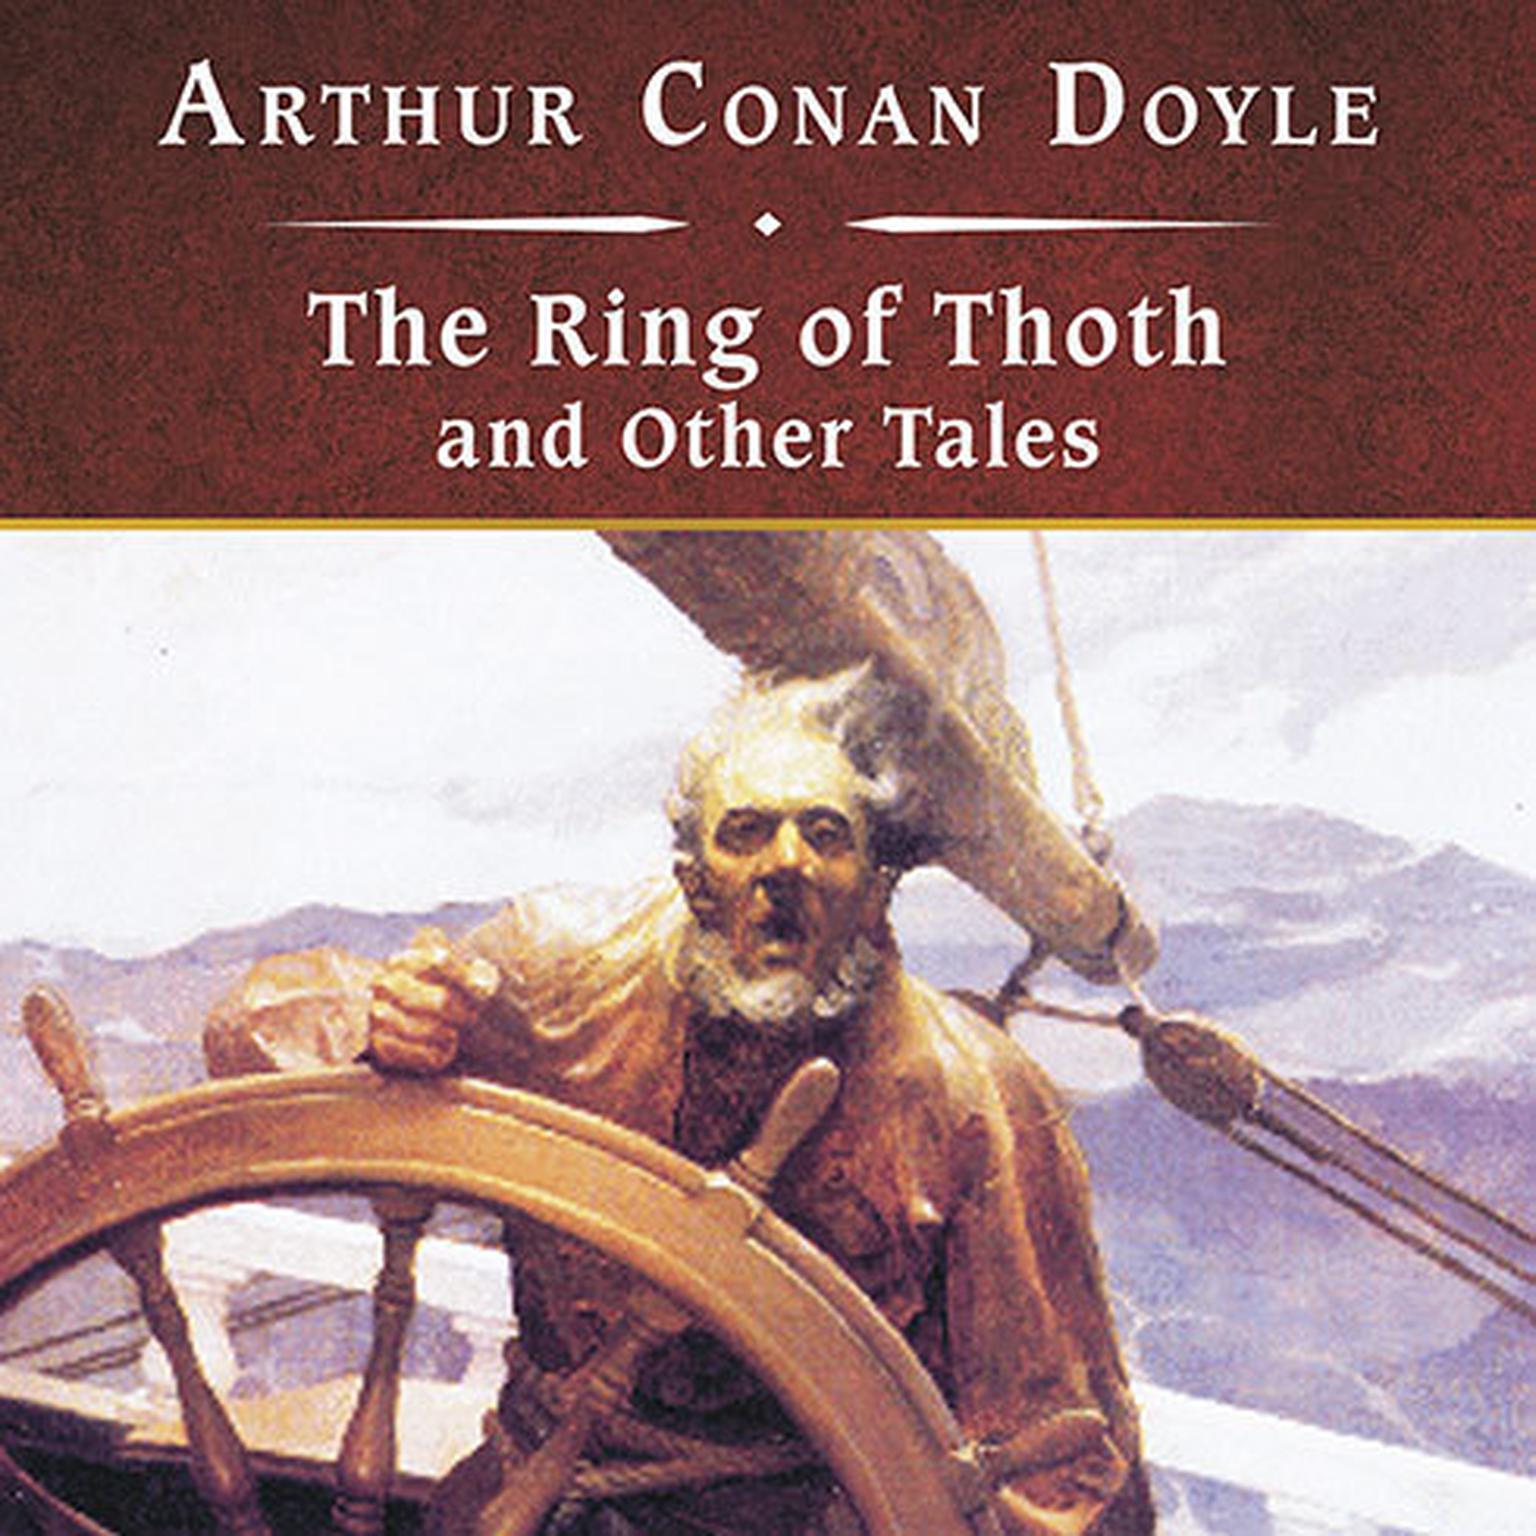 The Ring of Thoth and Other Tales, with eBook Audiobook, by Arthur Conan Doyle